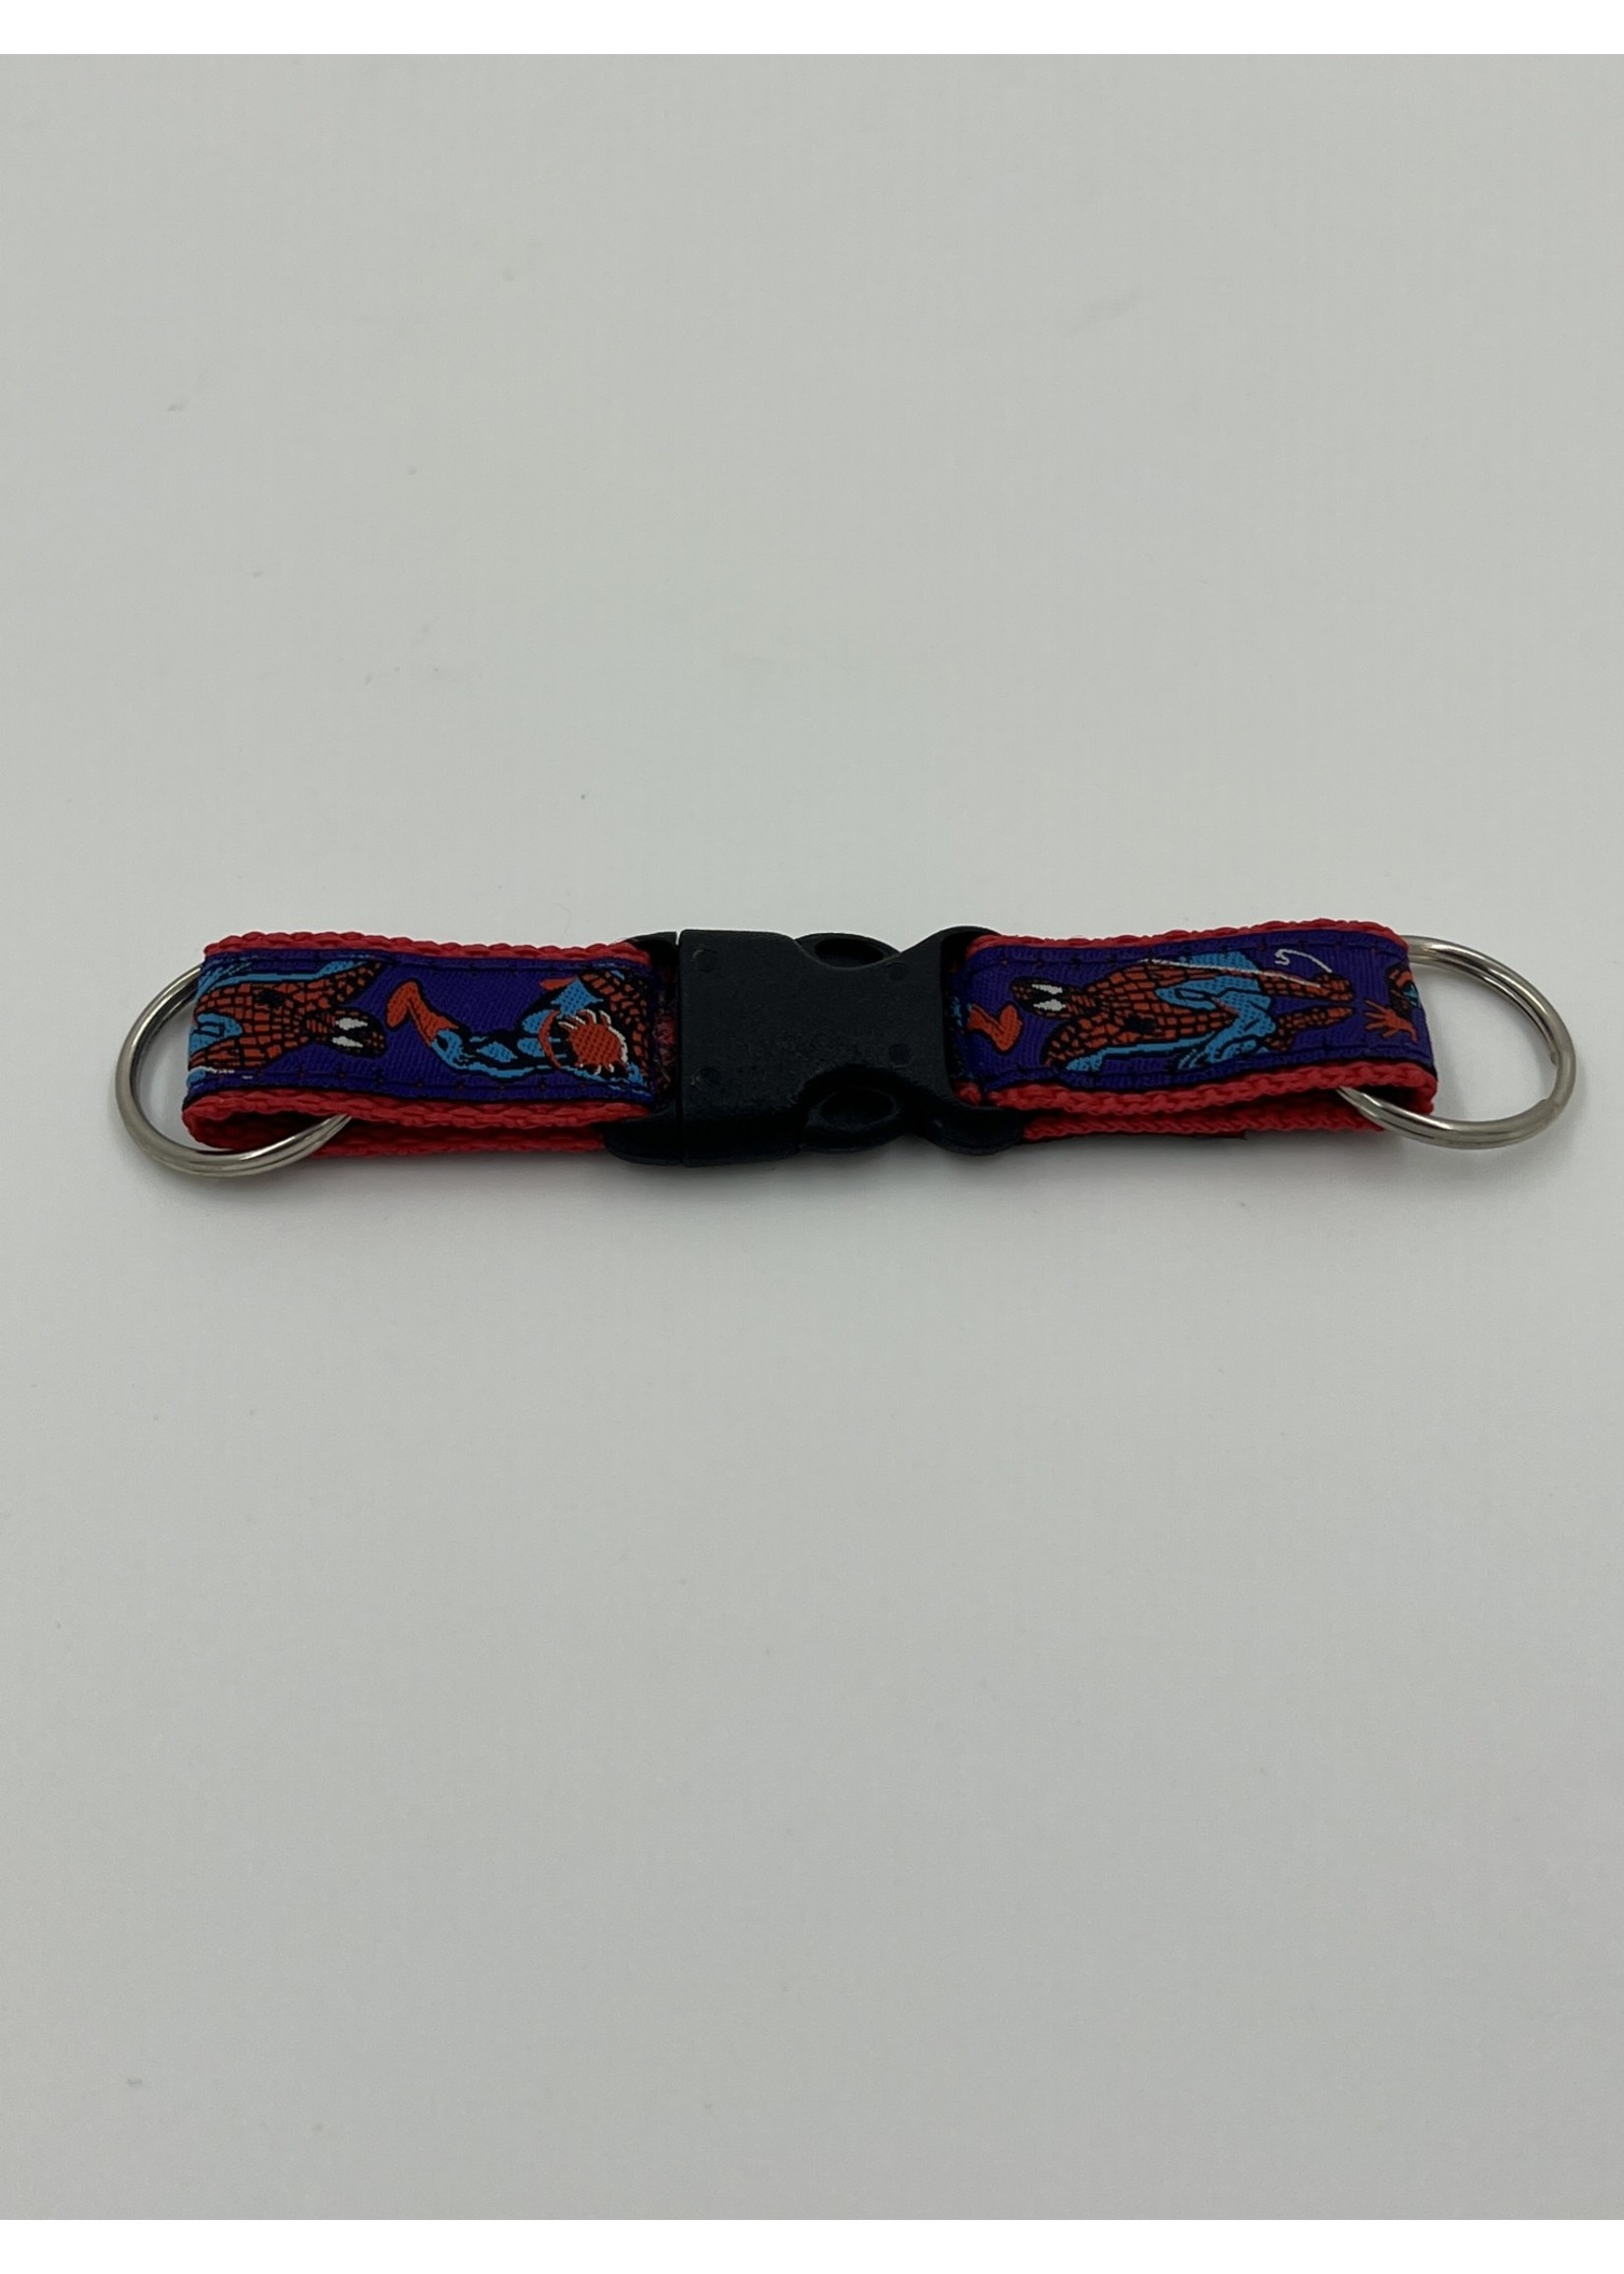 Other Things Marvel Snap Away Spiderman Key Chain